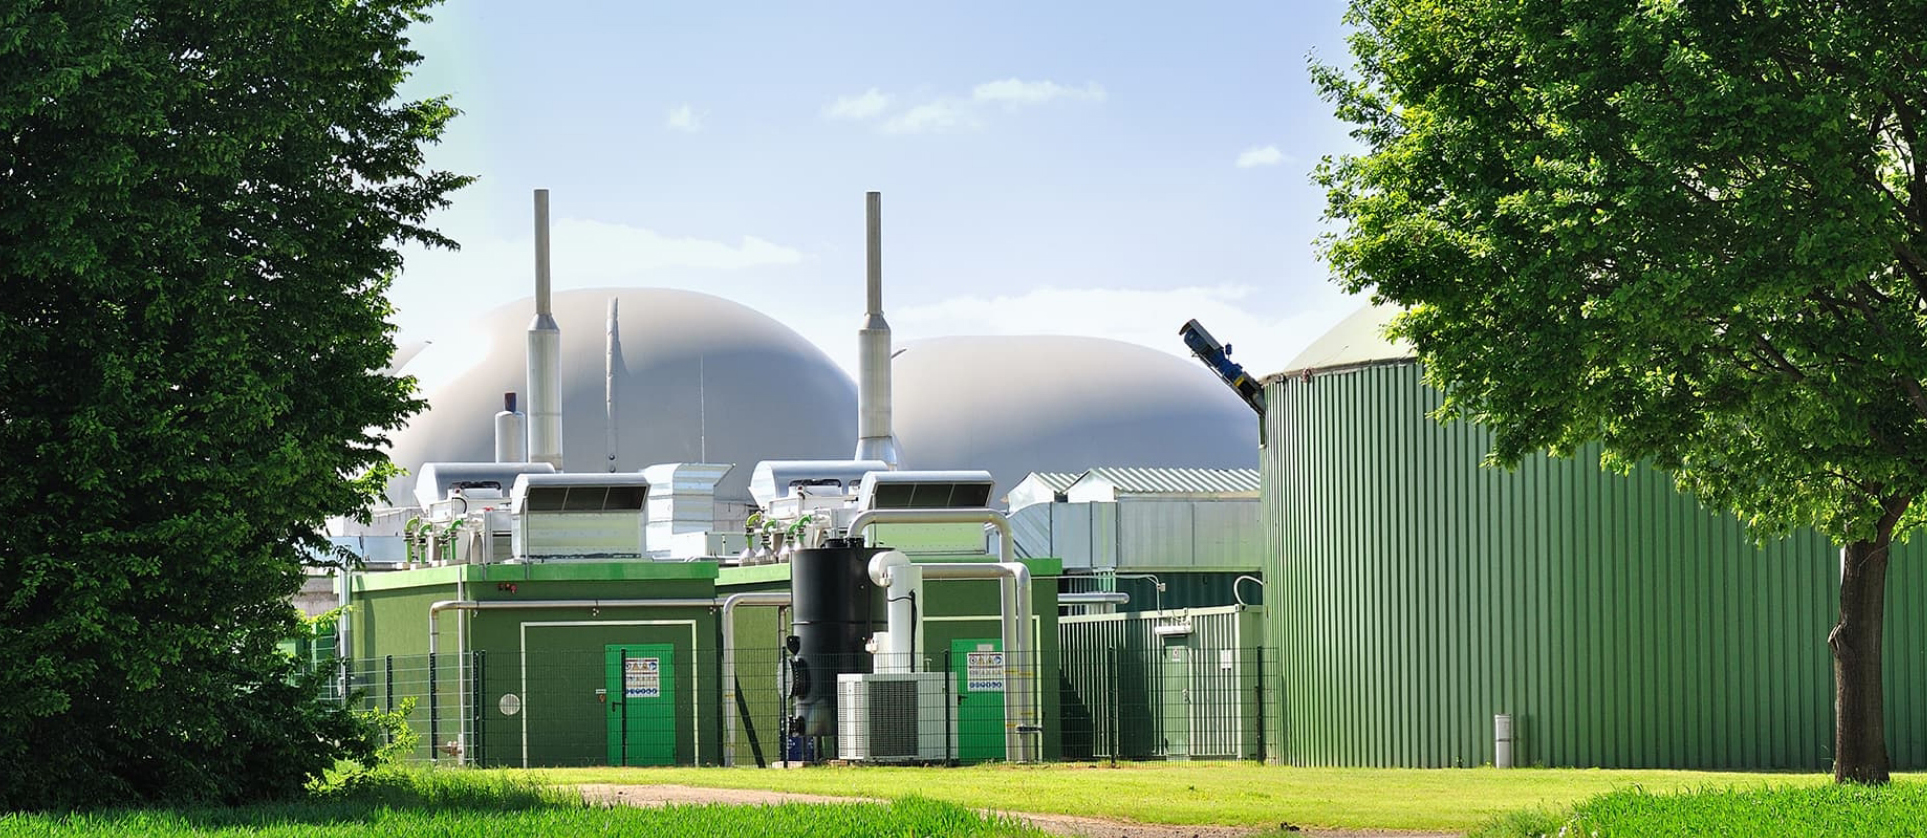 anaerobic digestion plant amongst trees